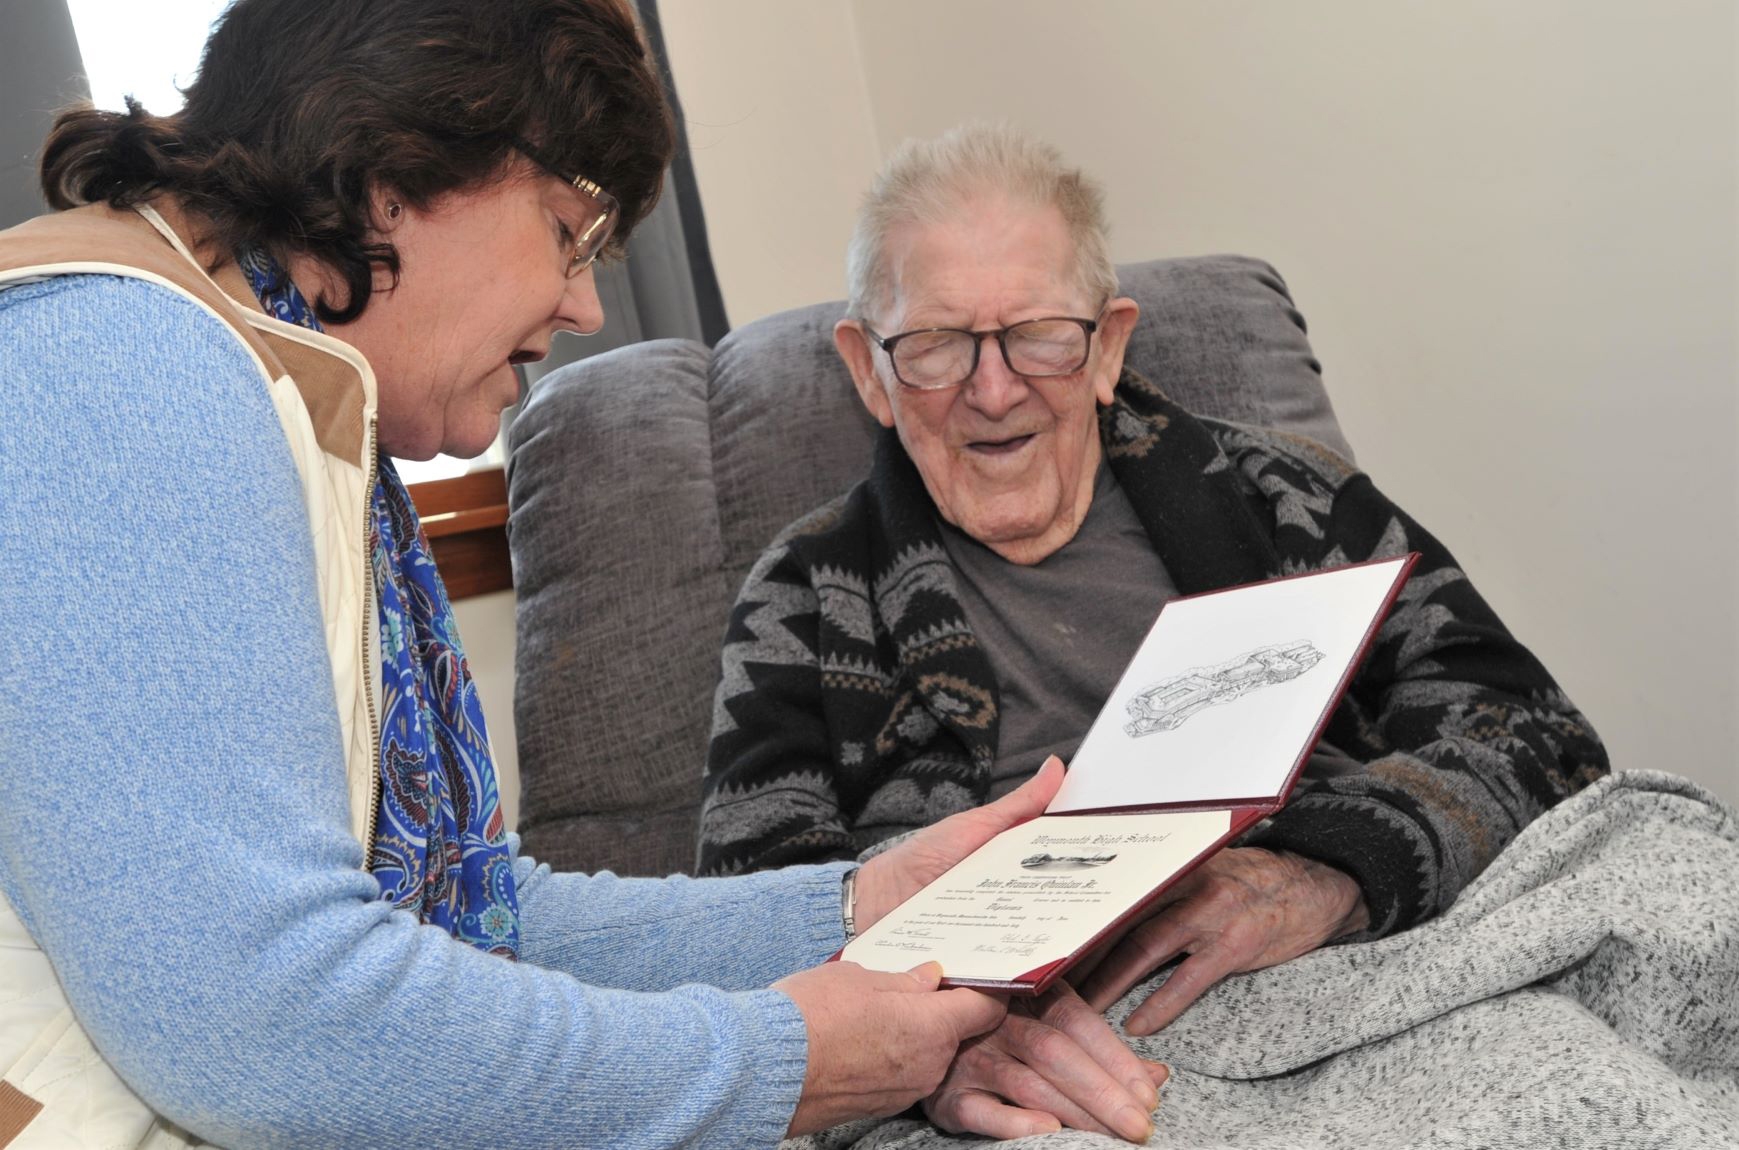 PHOTO: John Quinlan Jr. is presented with his high school diploma by Weymouth School Committee member, Kathy Sullivan Curran on his 99th birthday in his home in Weymouth, Mass., Feb 17, 2020.